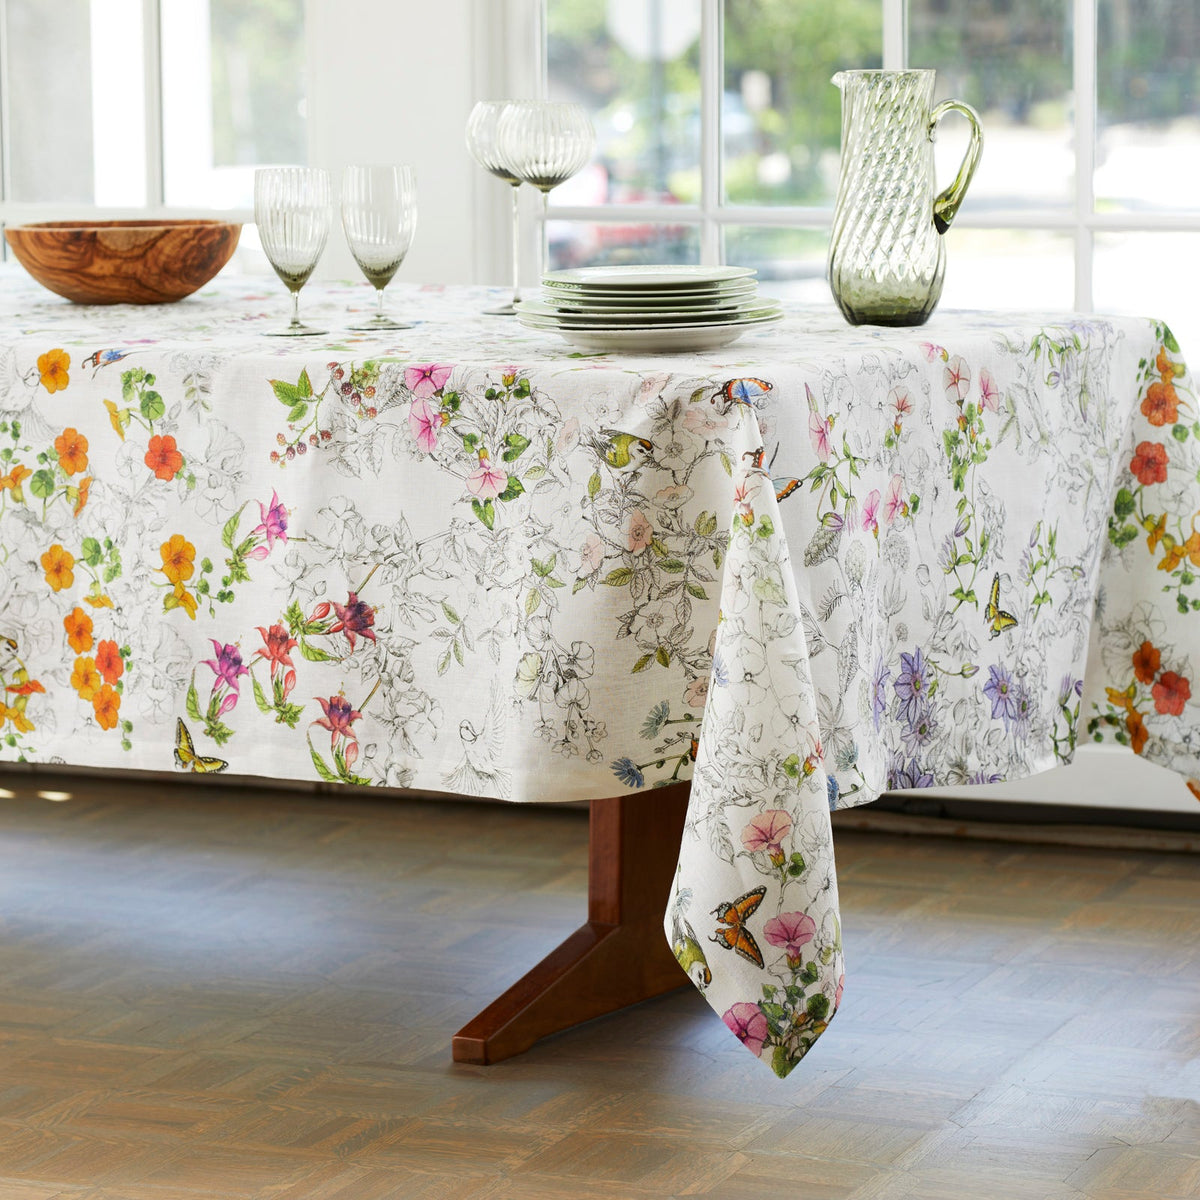 A Nasturtium Linen Tablecloth by TTT on a wooden table in Italy.